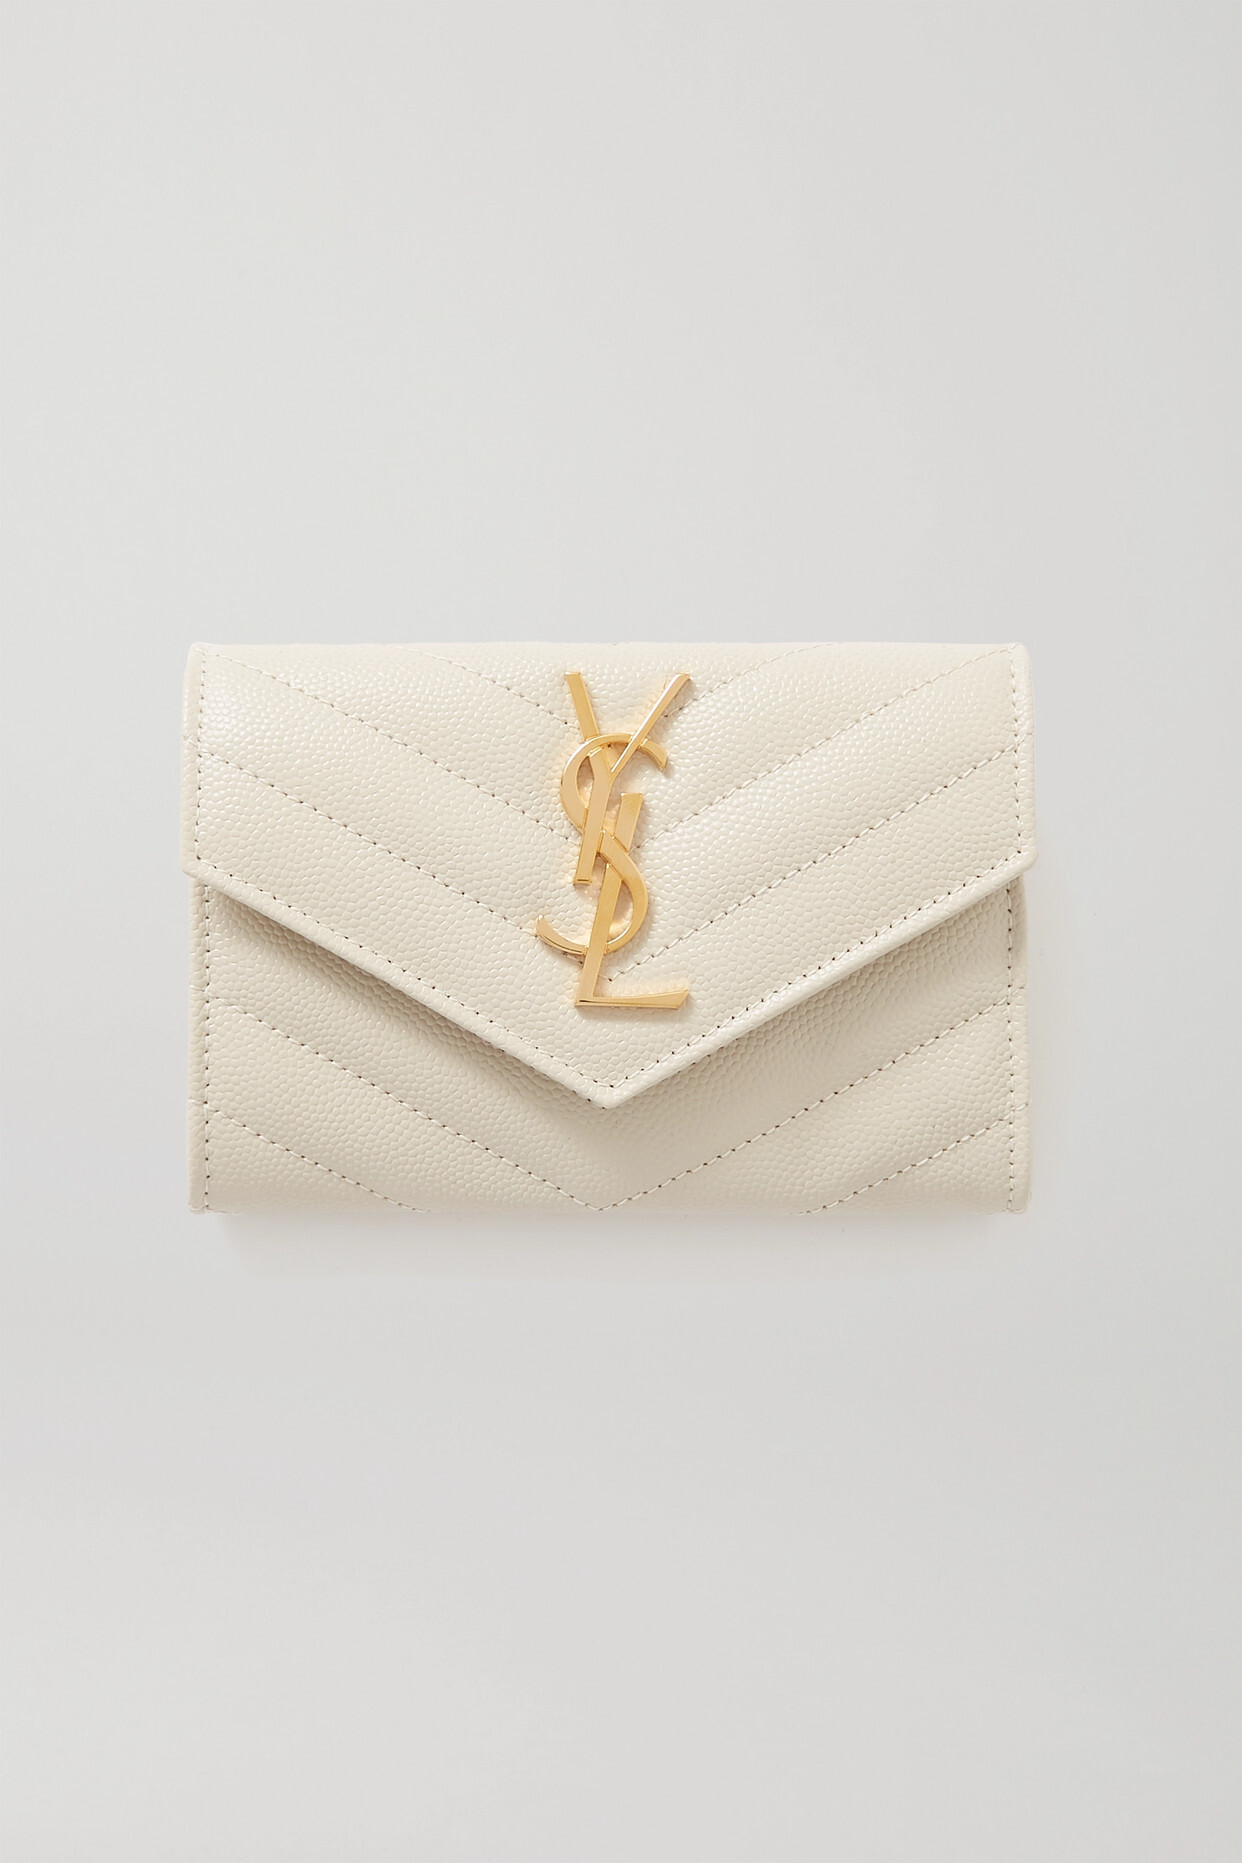 SAINT LAURENT - Monogramme Envelope Quilted Textured-leather Wallet - Off-white